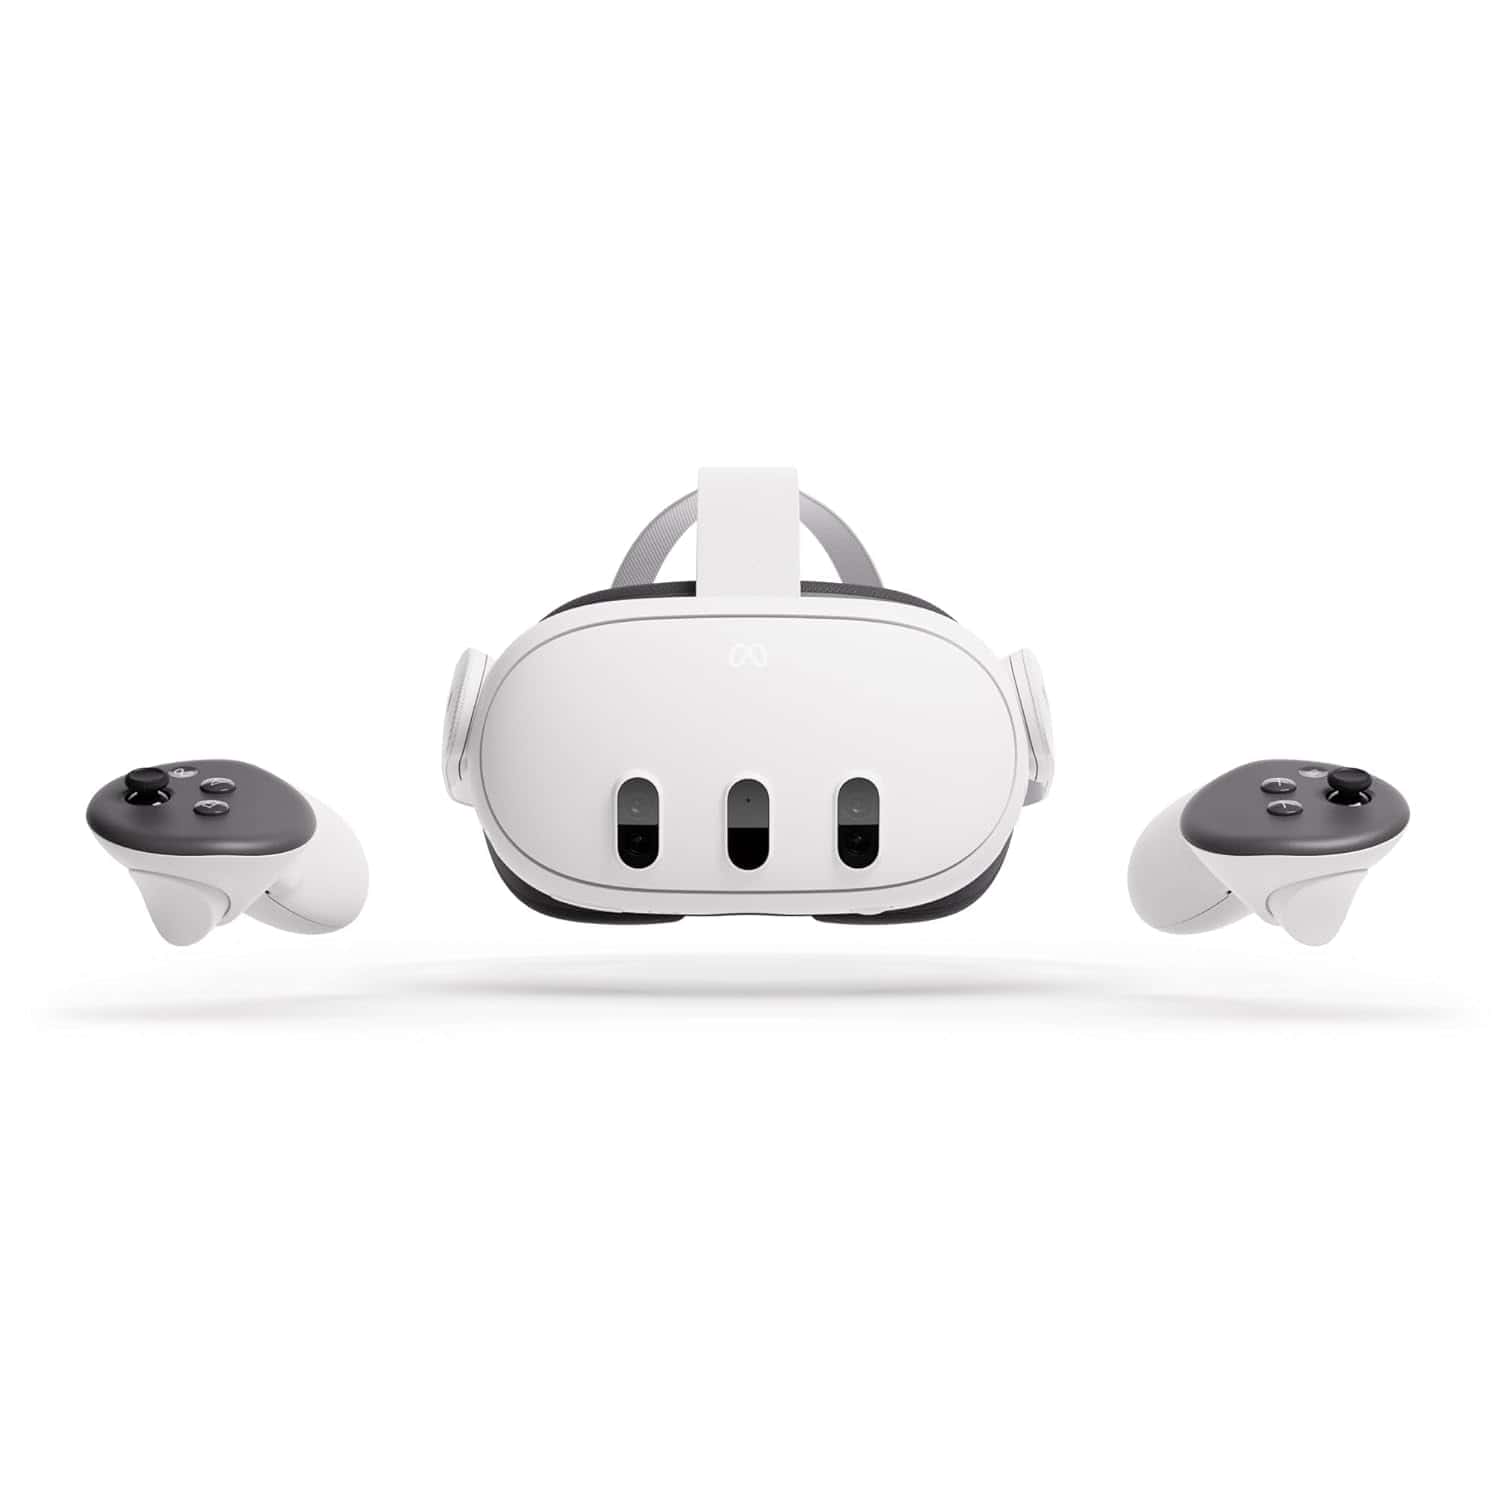 Xiaomi vr headset with Meta Quest 3 controllers on a white background.